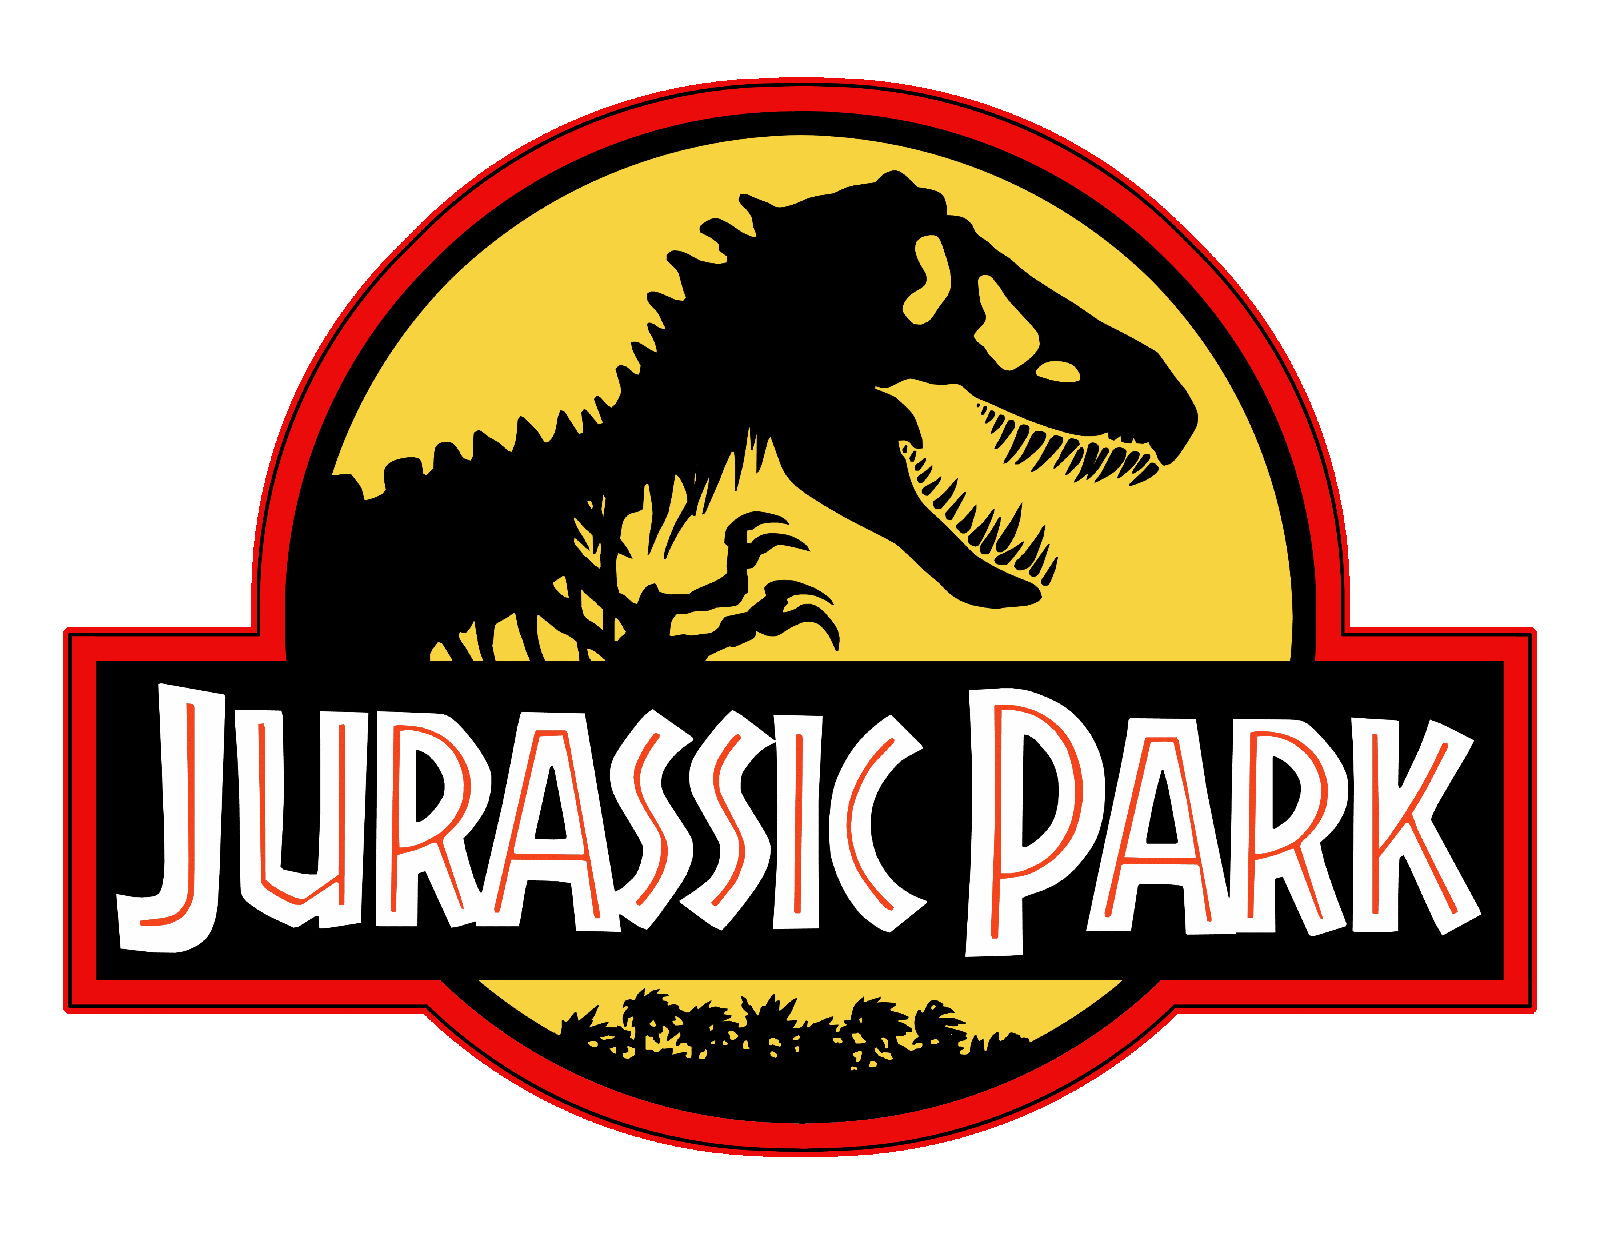 Jurassic Park Logo - Jurassic Park Logo, Jurassic Park Symbol, Meaning, History and Evolution